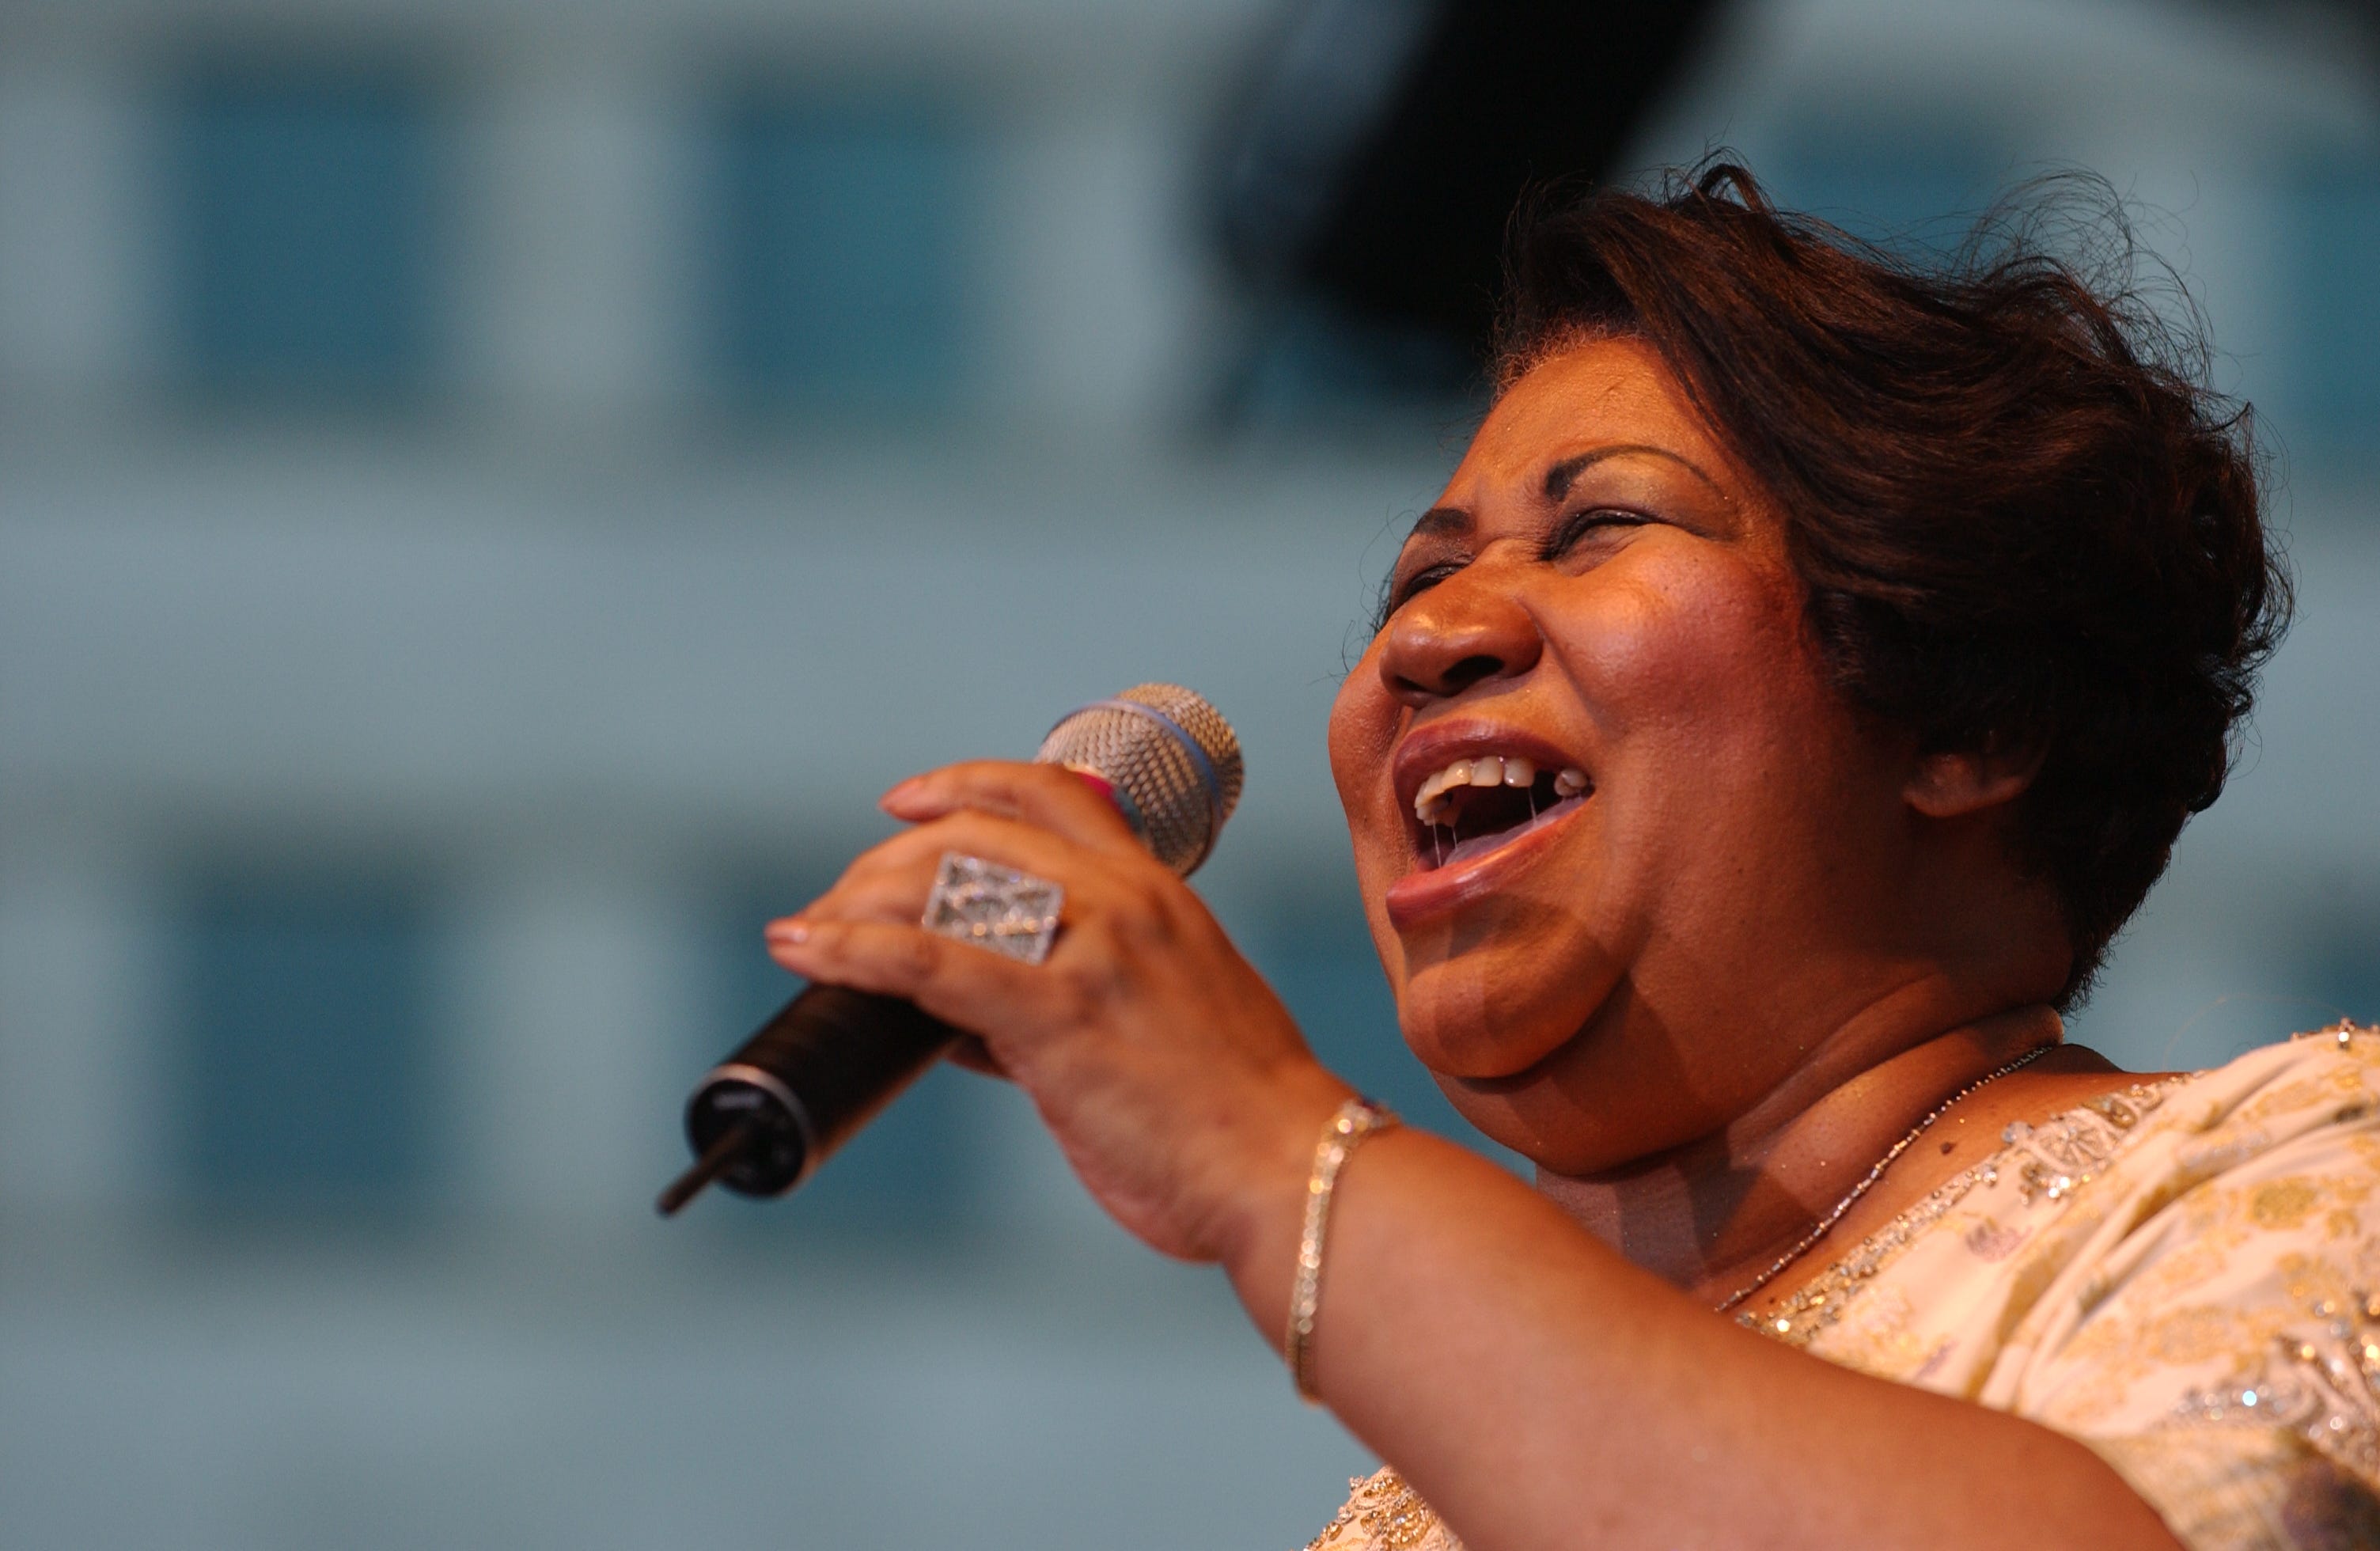 (FILE -2004) Detroit and Motown legend Aretha Franklin performs at the 25th Ford Detroit International Jazz Festival at Hart Plaza in Detroit, Michigan on September 6, 2004.